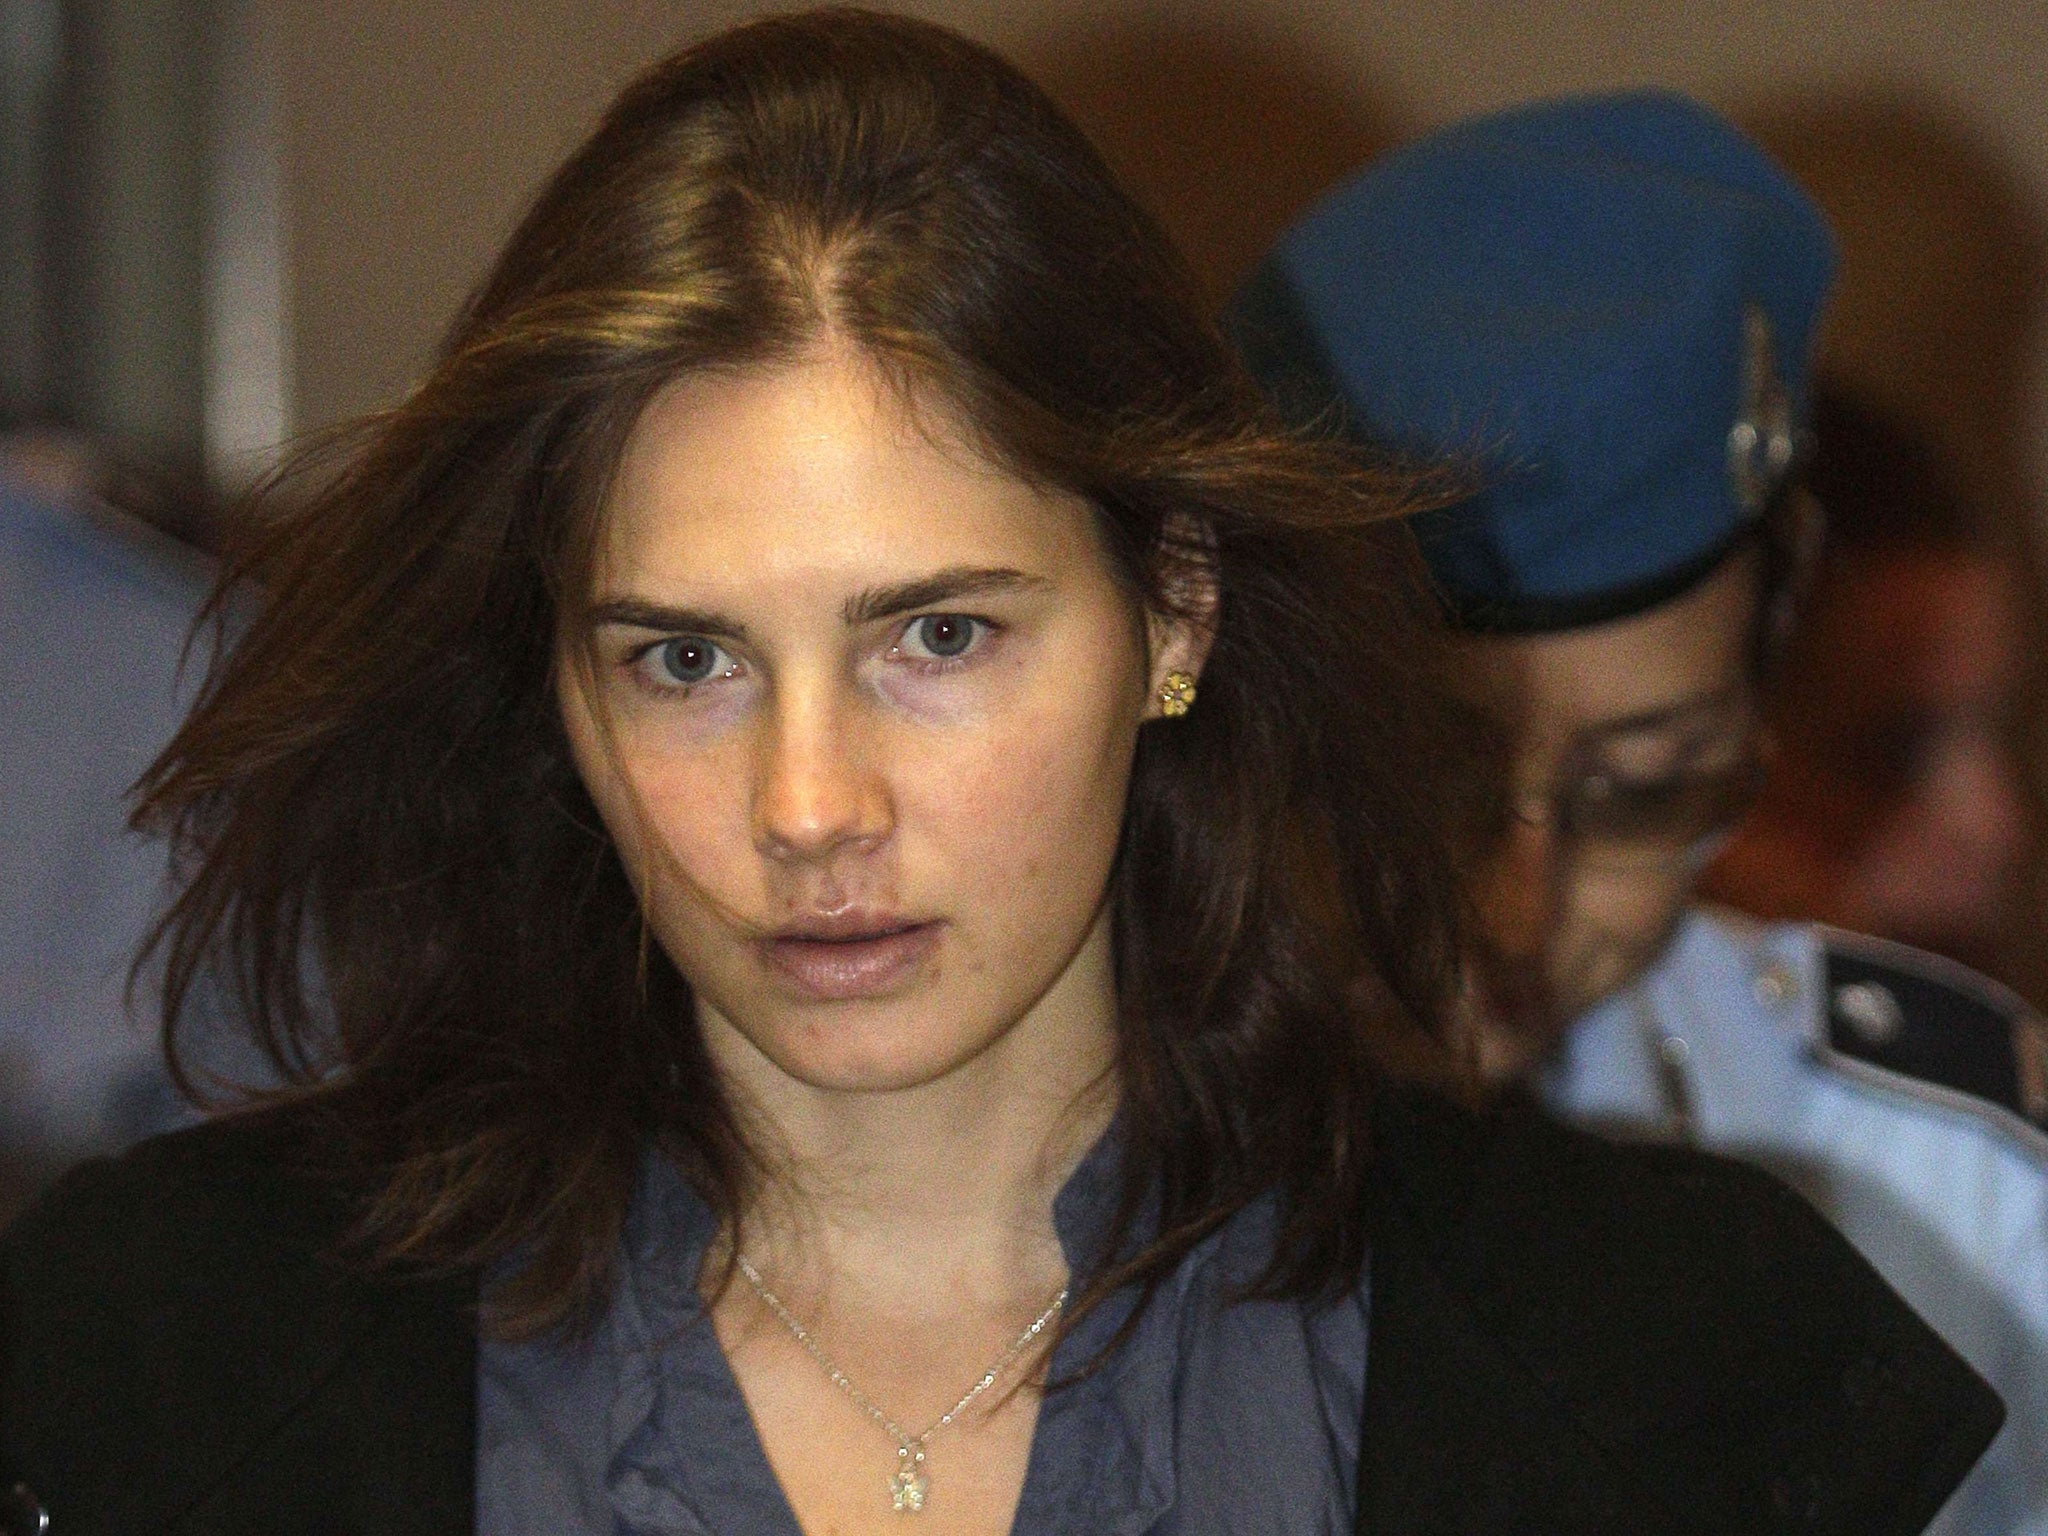 Amanda Knox, pictured here in 2011, was not present in the courtroom for the verdict